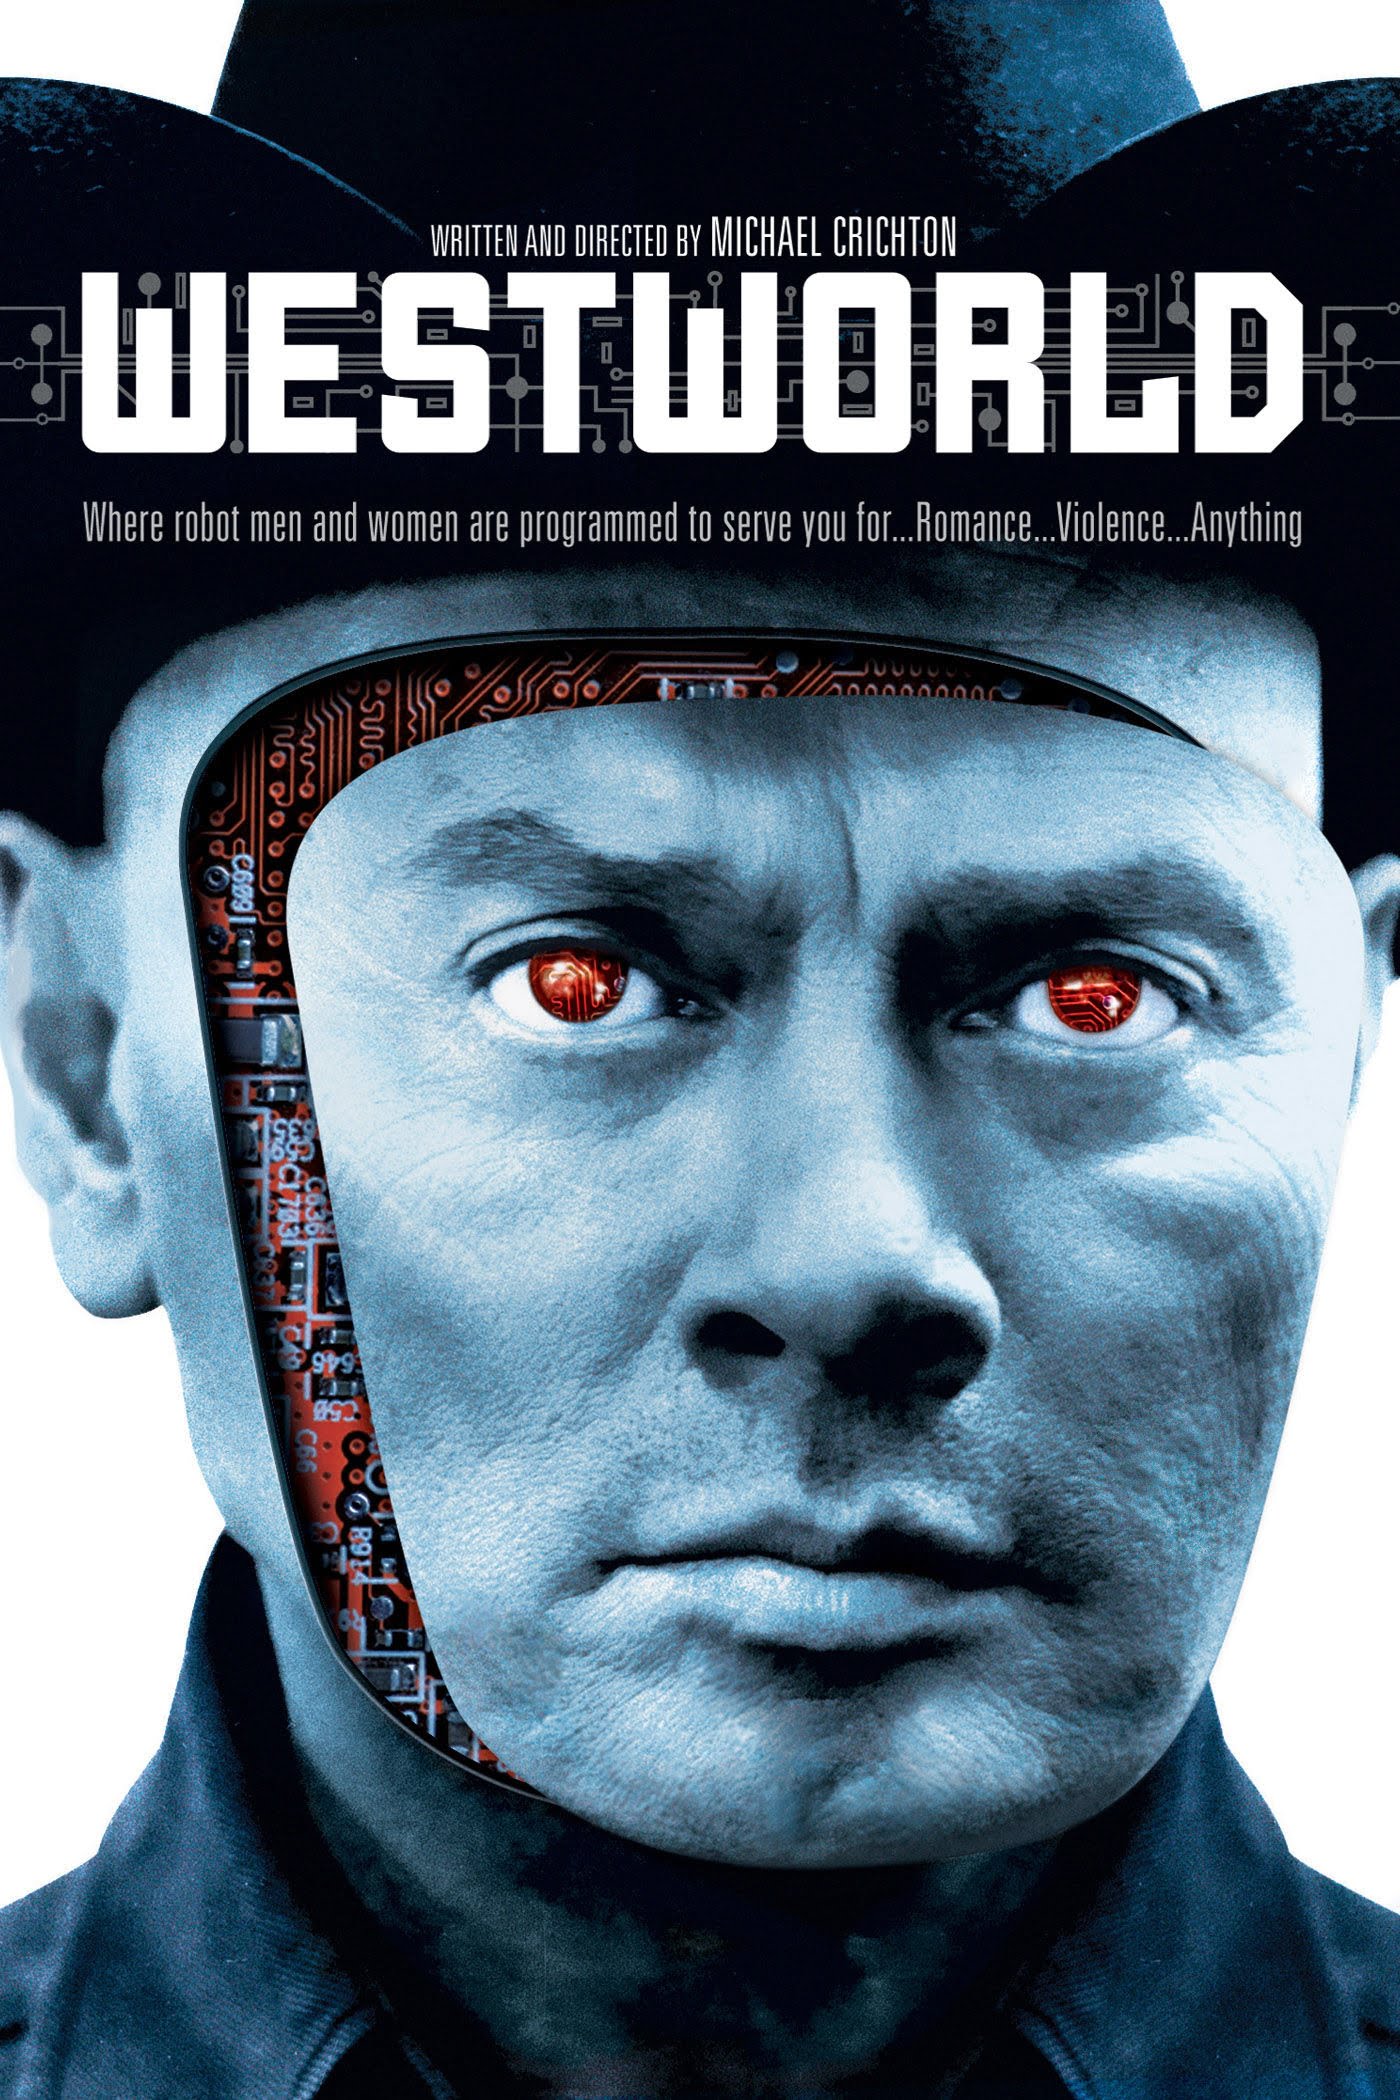 westworld-1973-filming-locations-dvd-cover